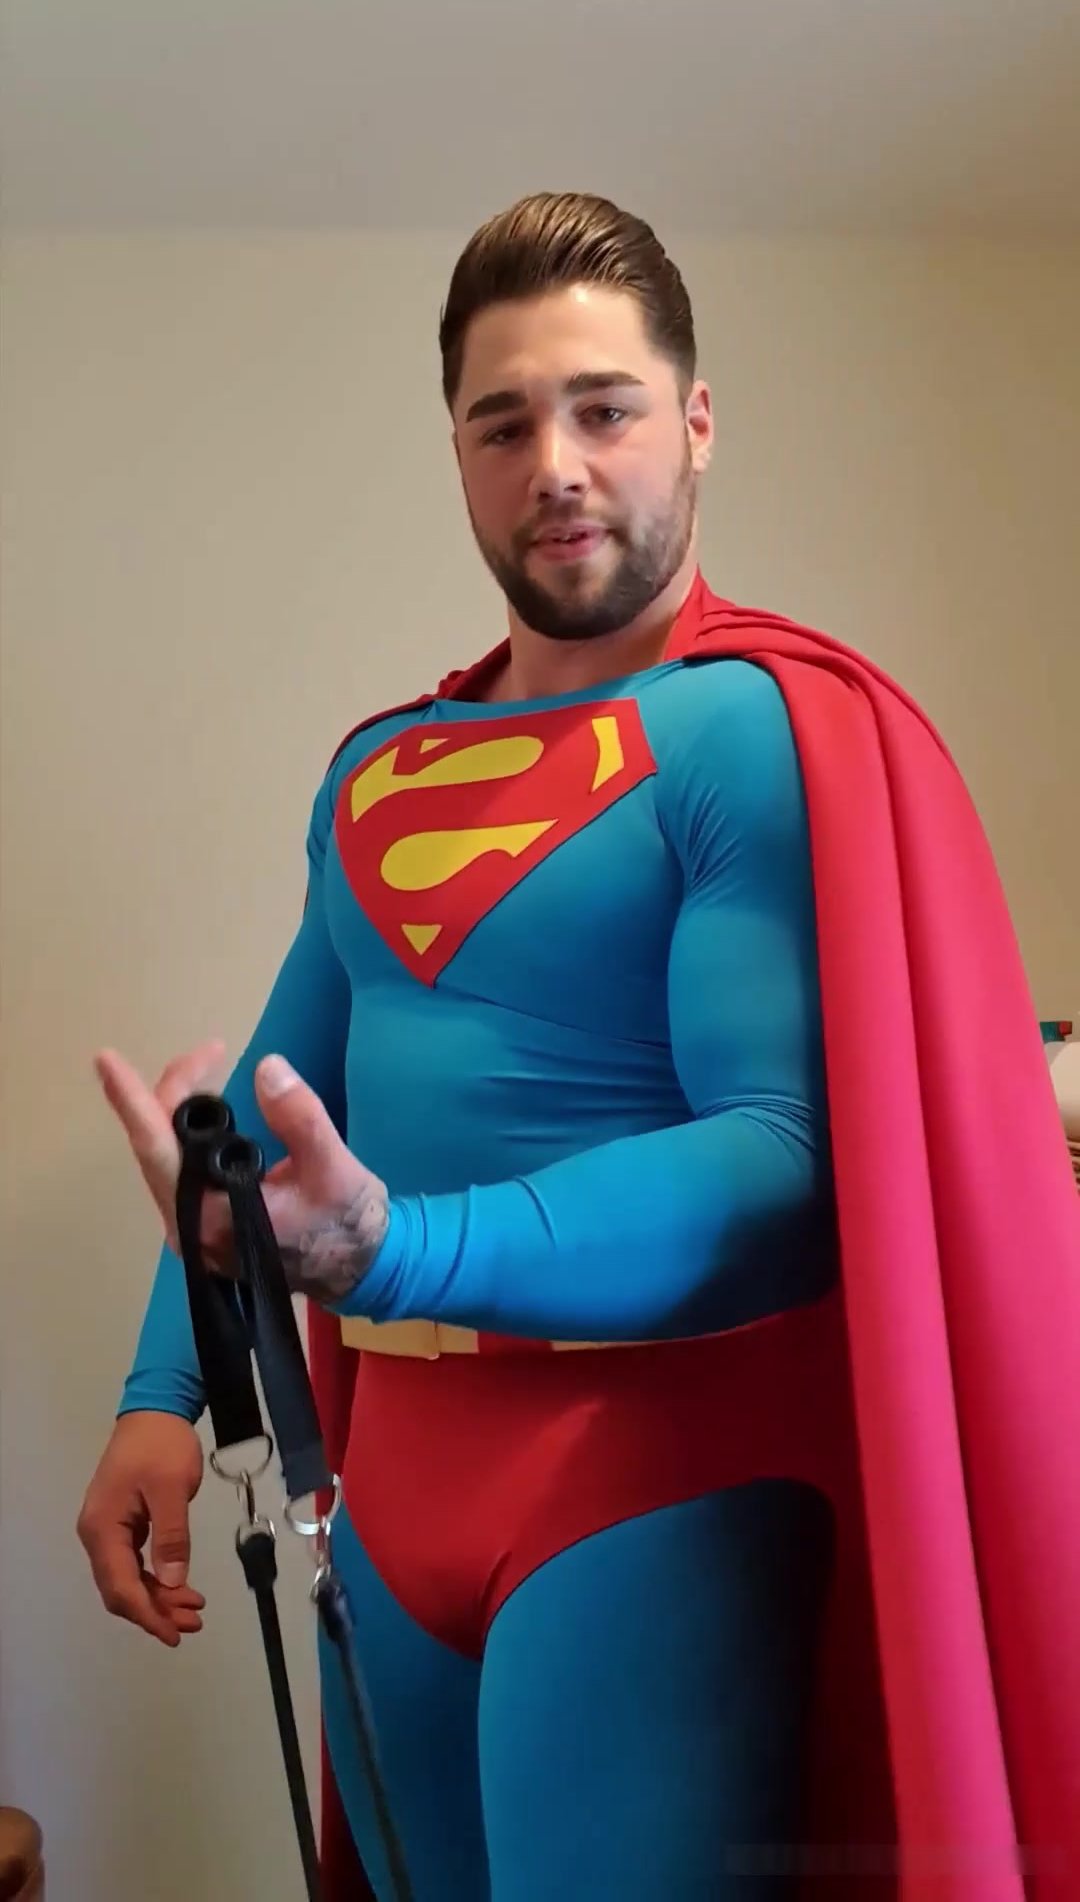 Superman Cosplay - Hot cosplay: Superman home workout - ThisVid.com